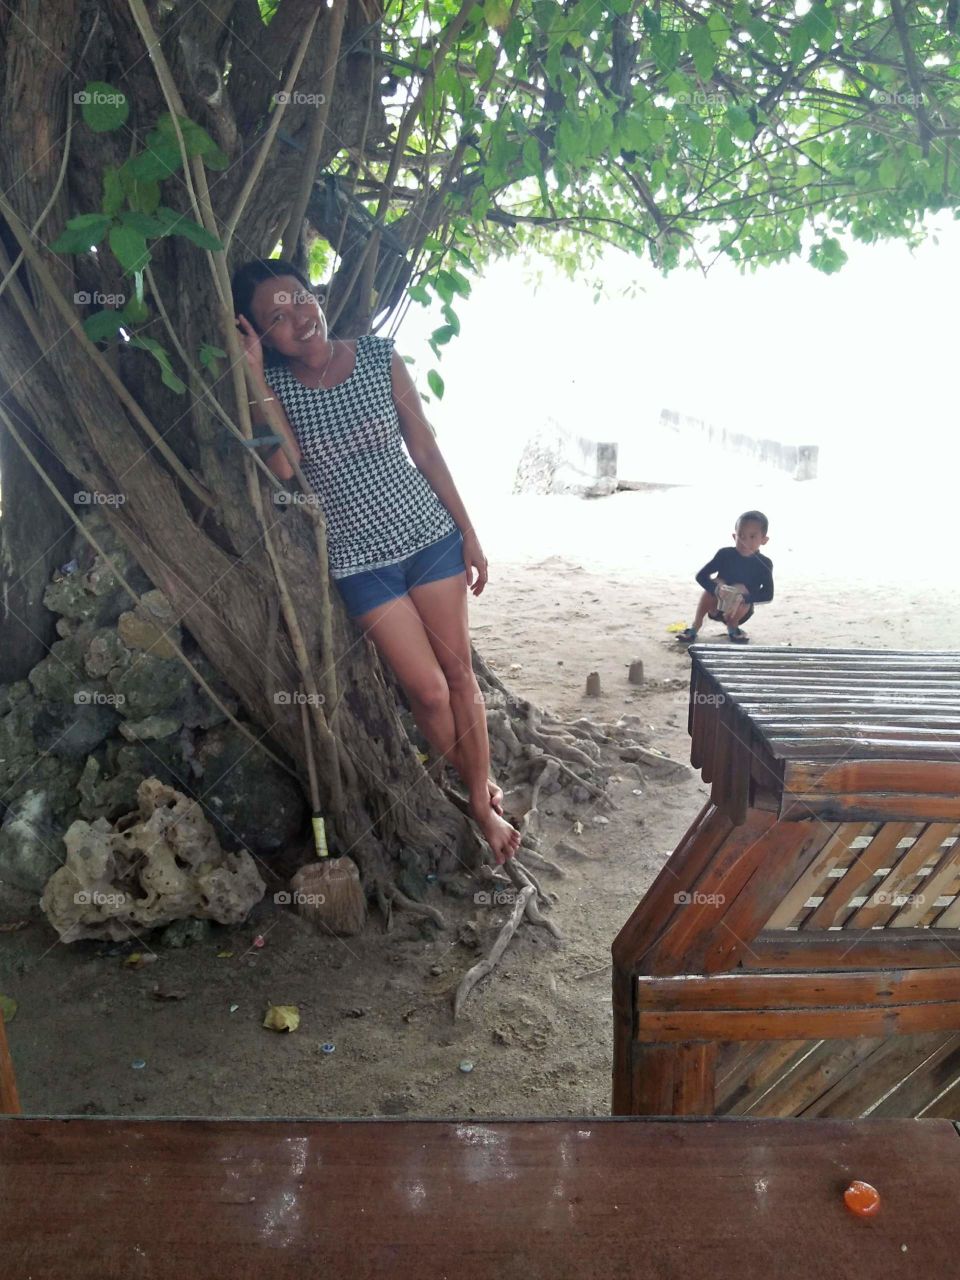 captured with the giant tree on the beach